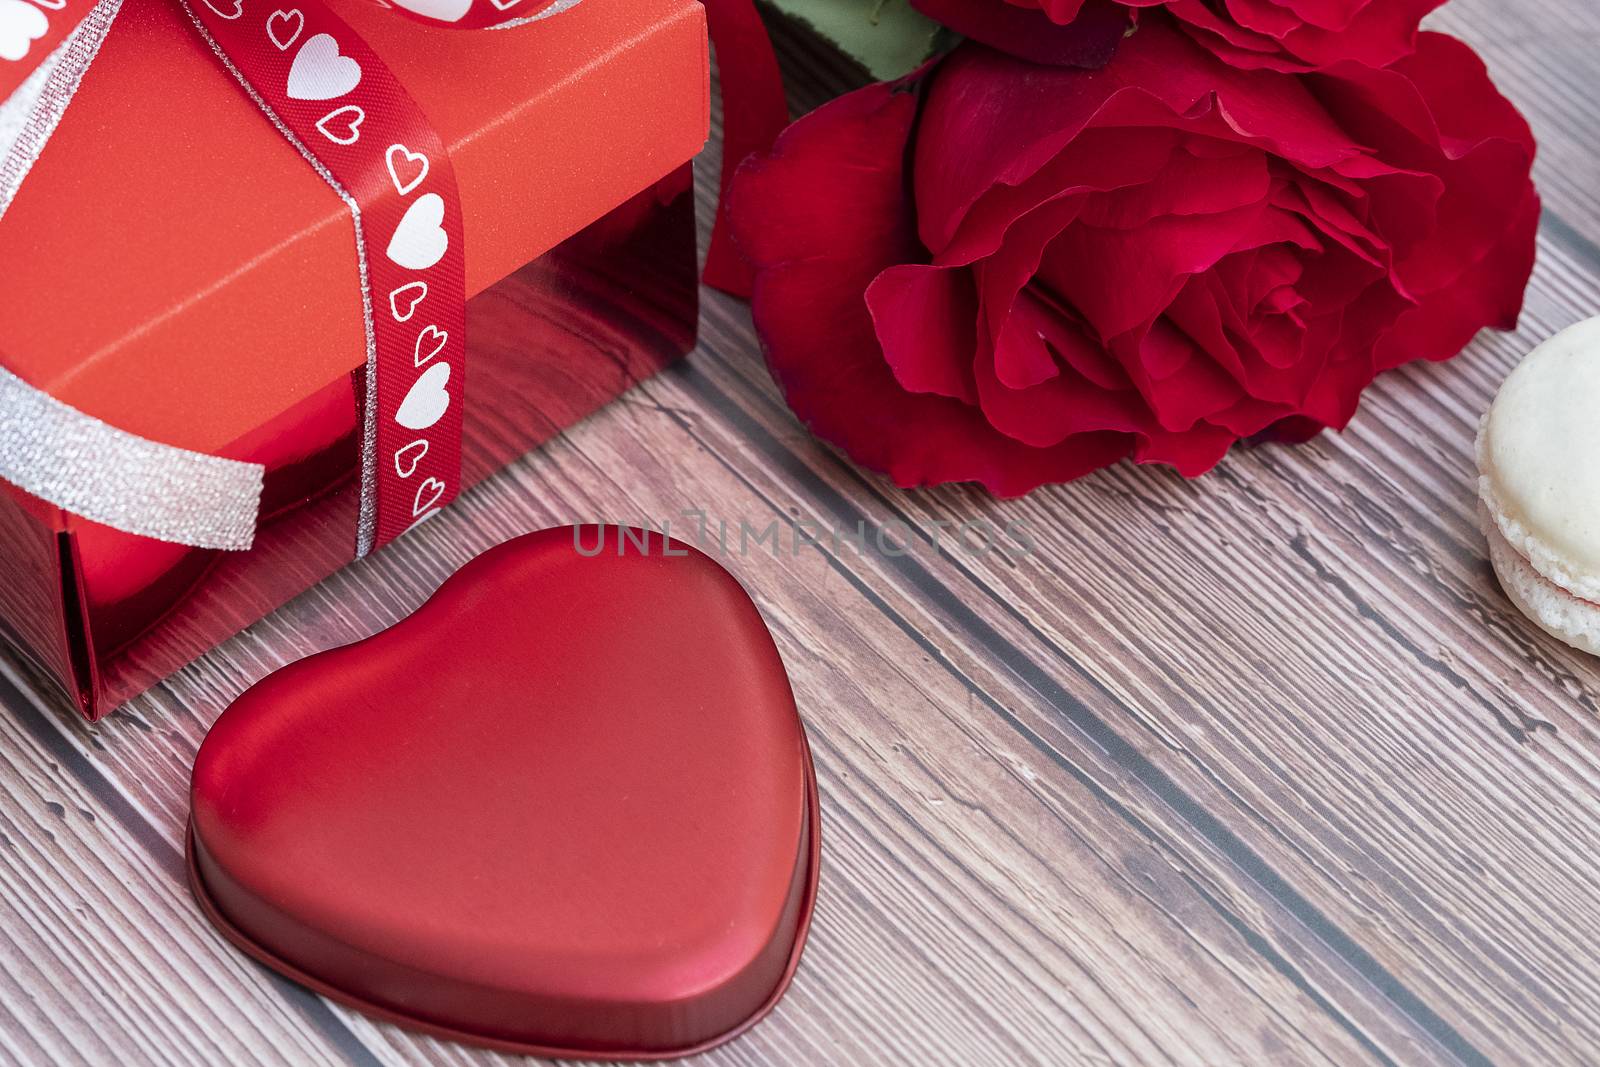 Present box, red rose, and a red heart-shaped metal piece by Nawoot